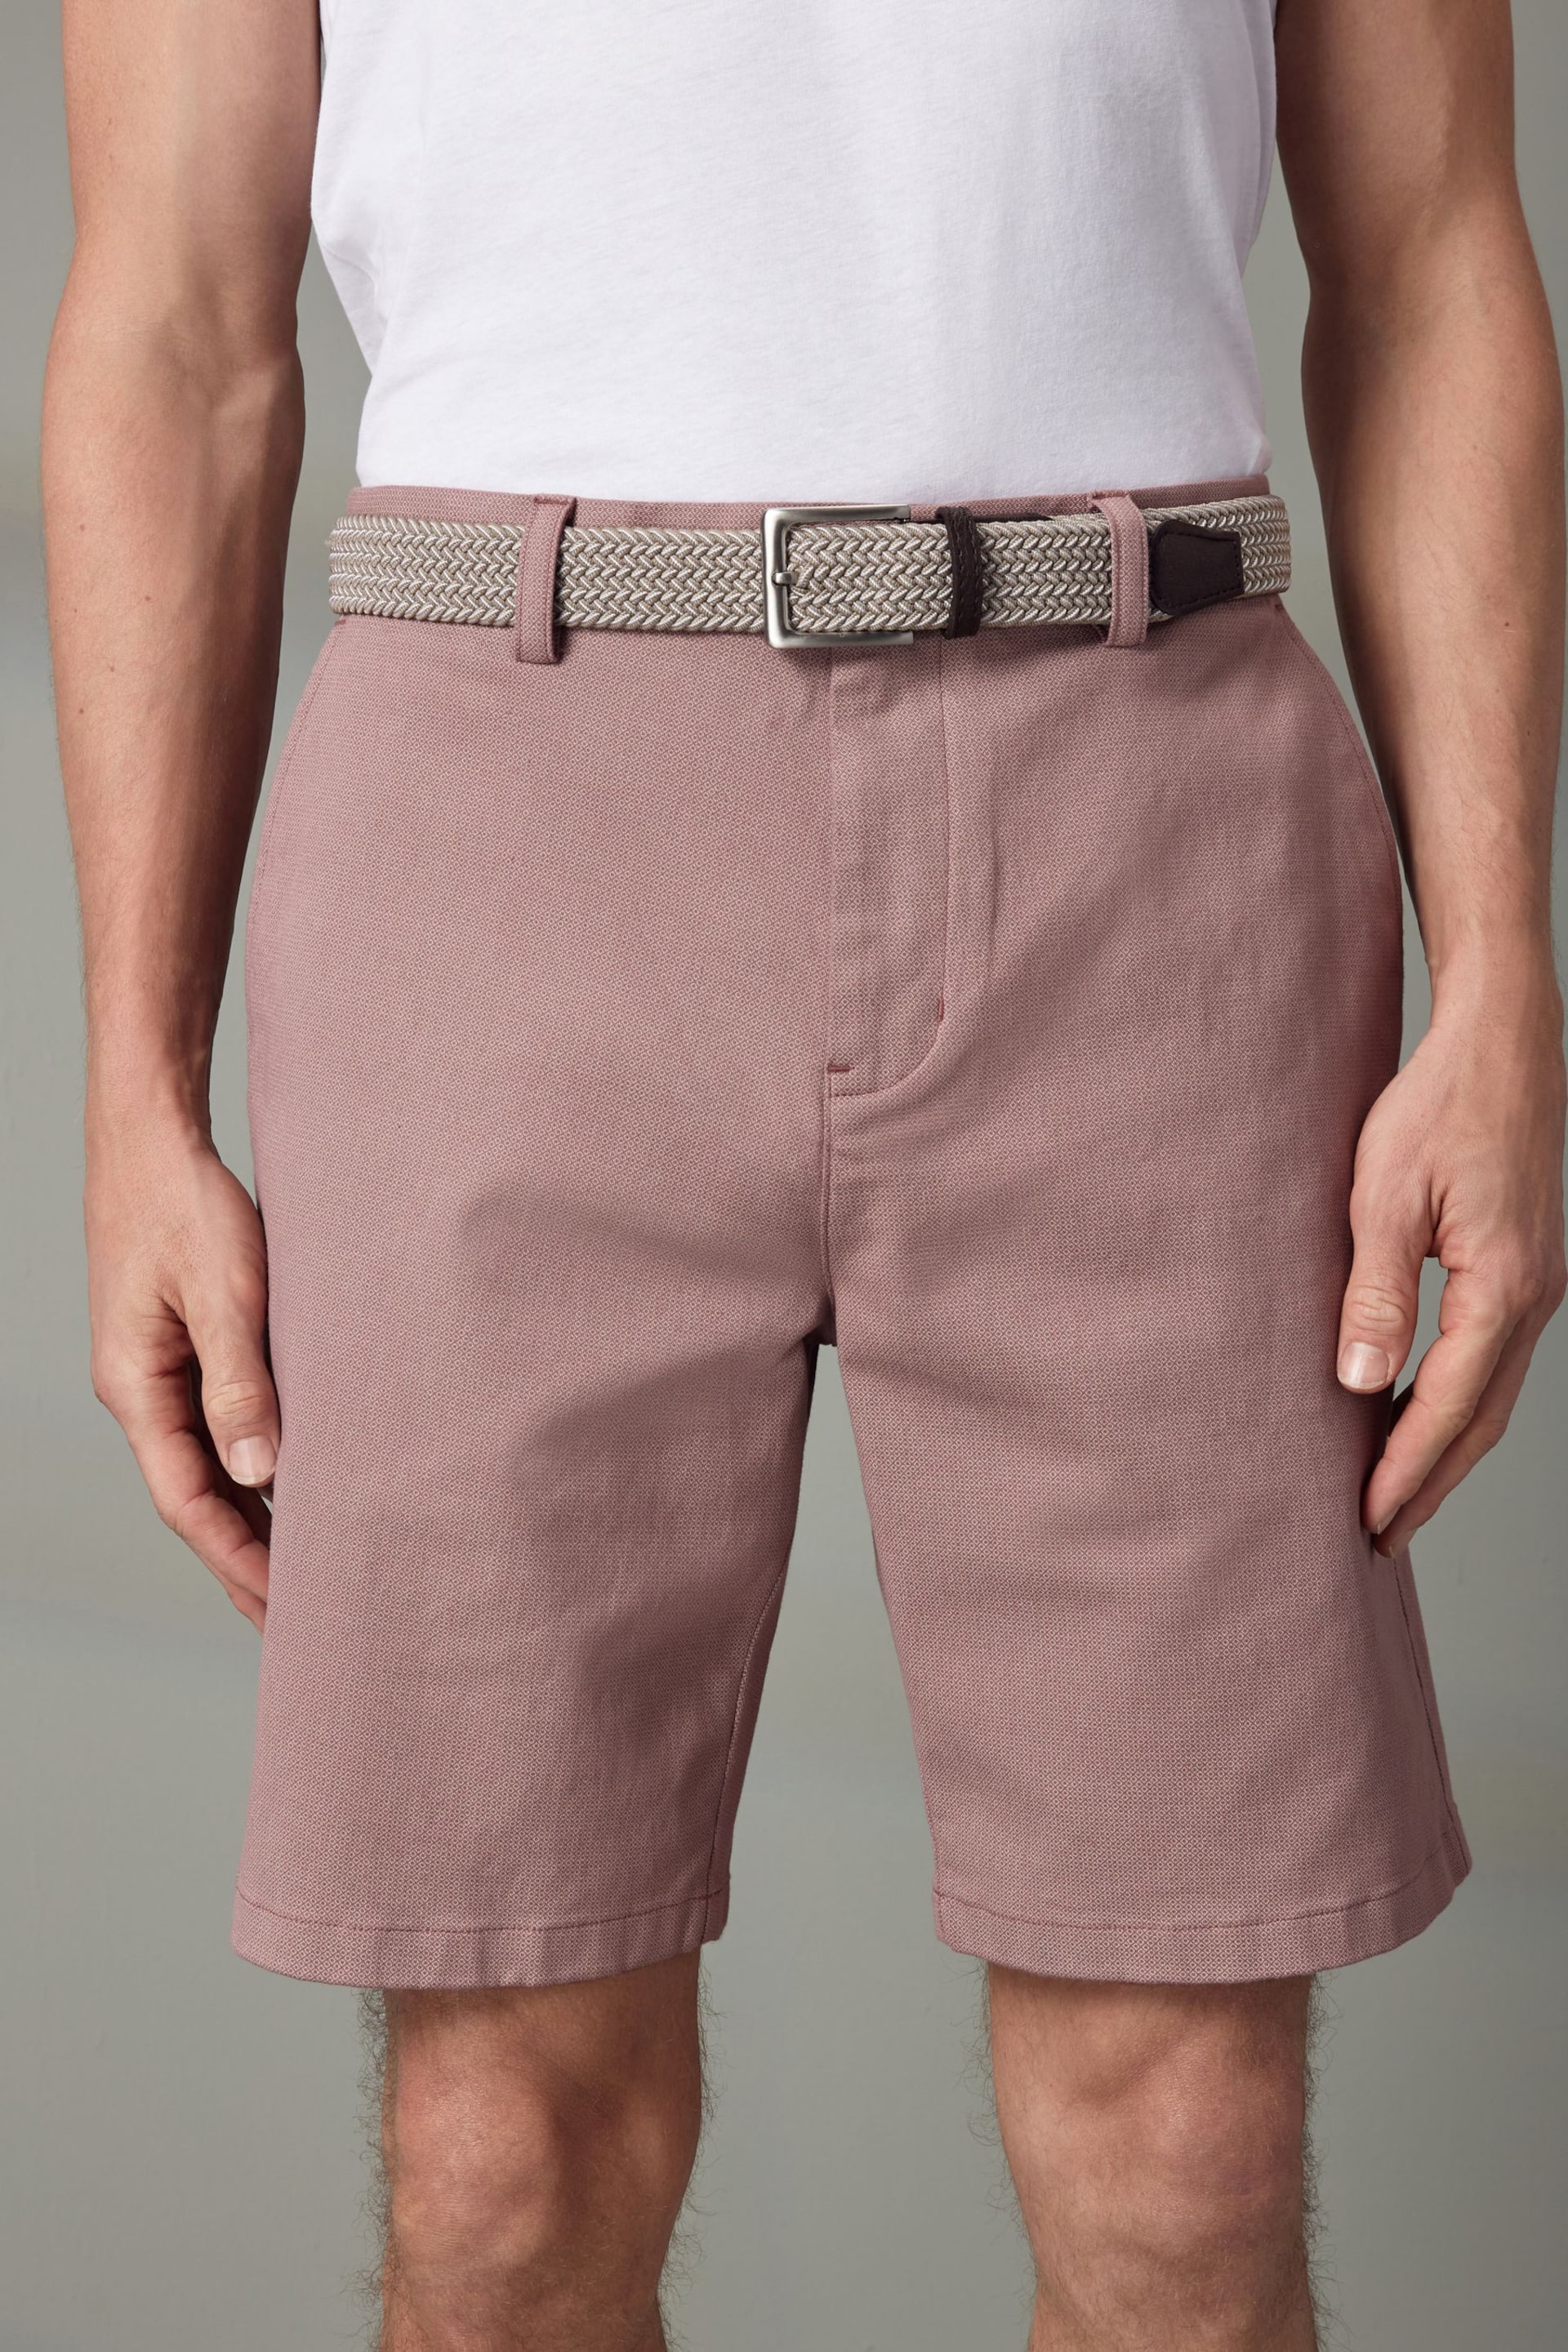 Pink Textured Cotton Blend Chino Shorts with Belt Included - Image 1 of 9